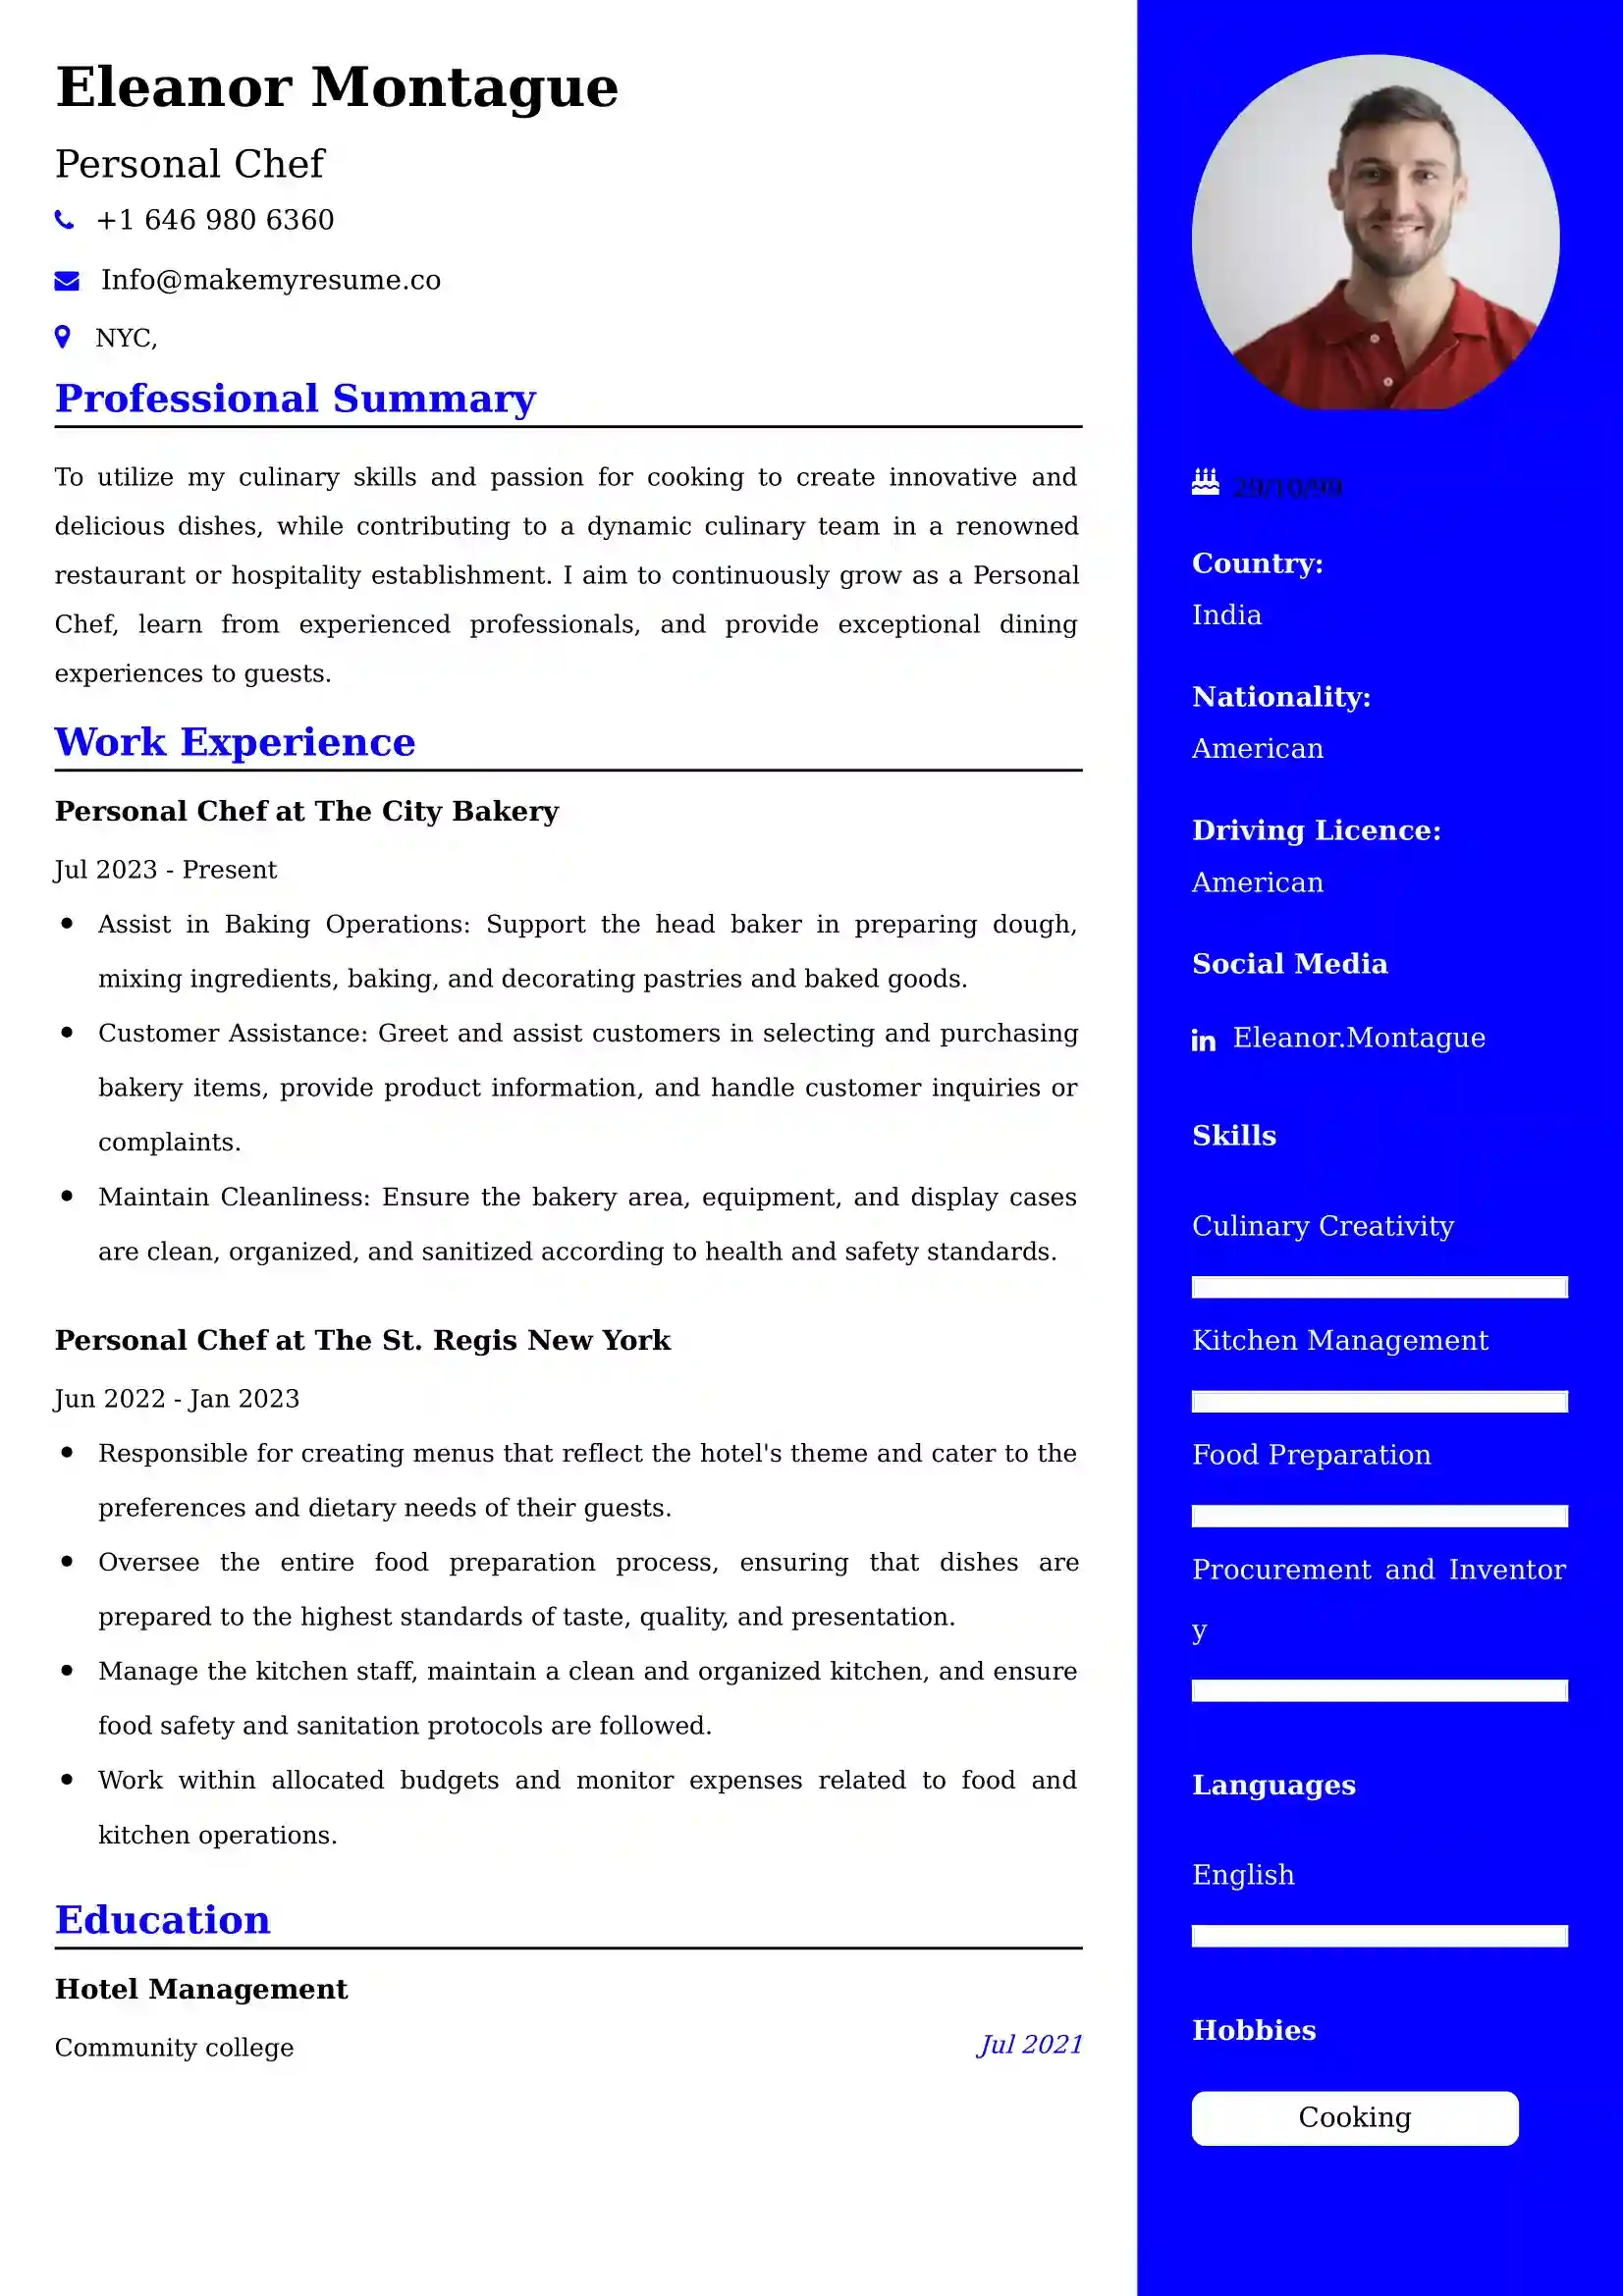 Personal Chef Resume Examples India